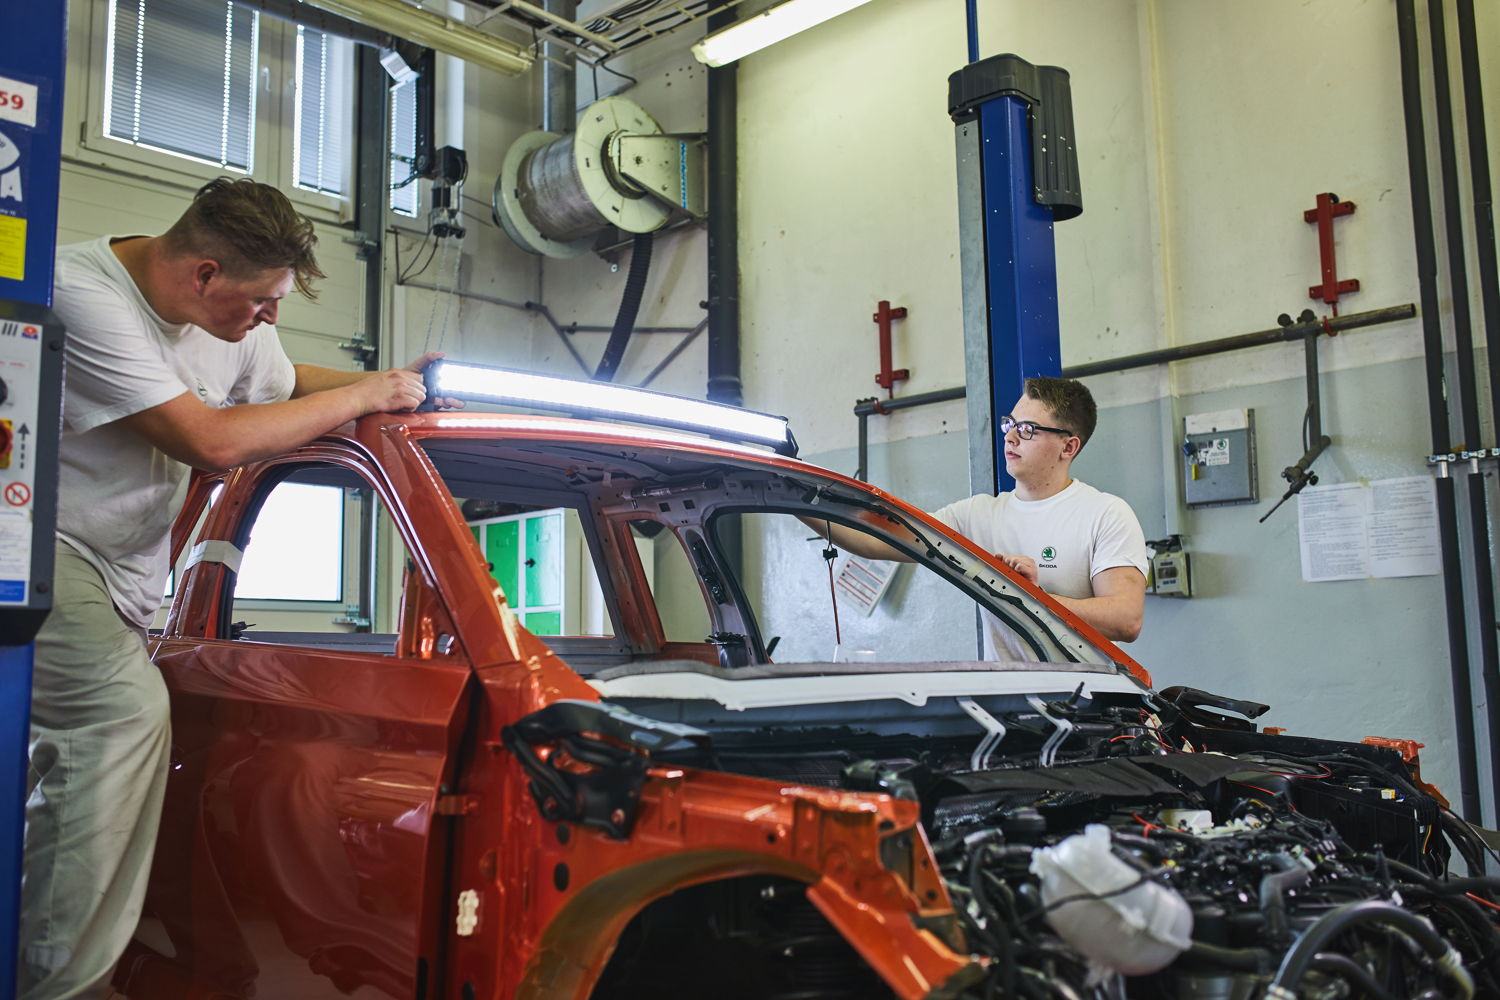 Two apprentices from the ŠKODA Vocational School are
attaching a distinctive light bar to the roof of the ŠKODA
MOUNTIAQ.